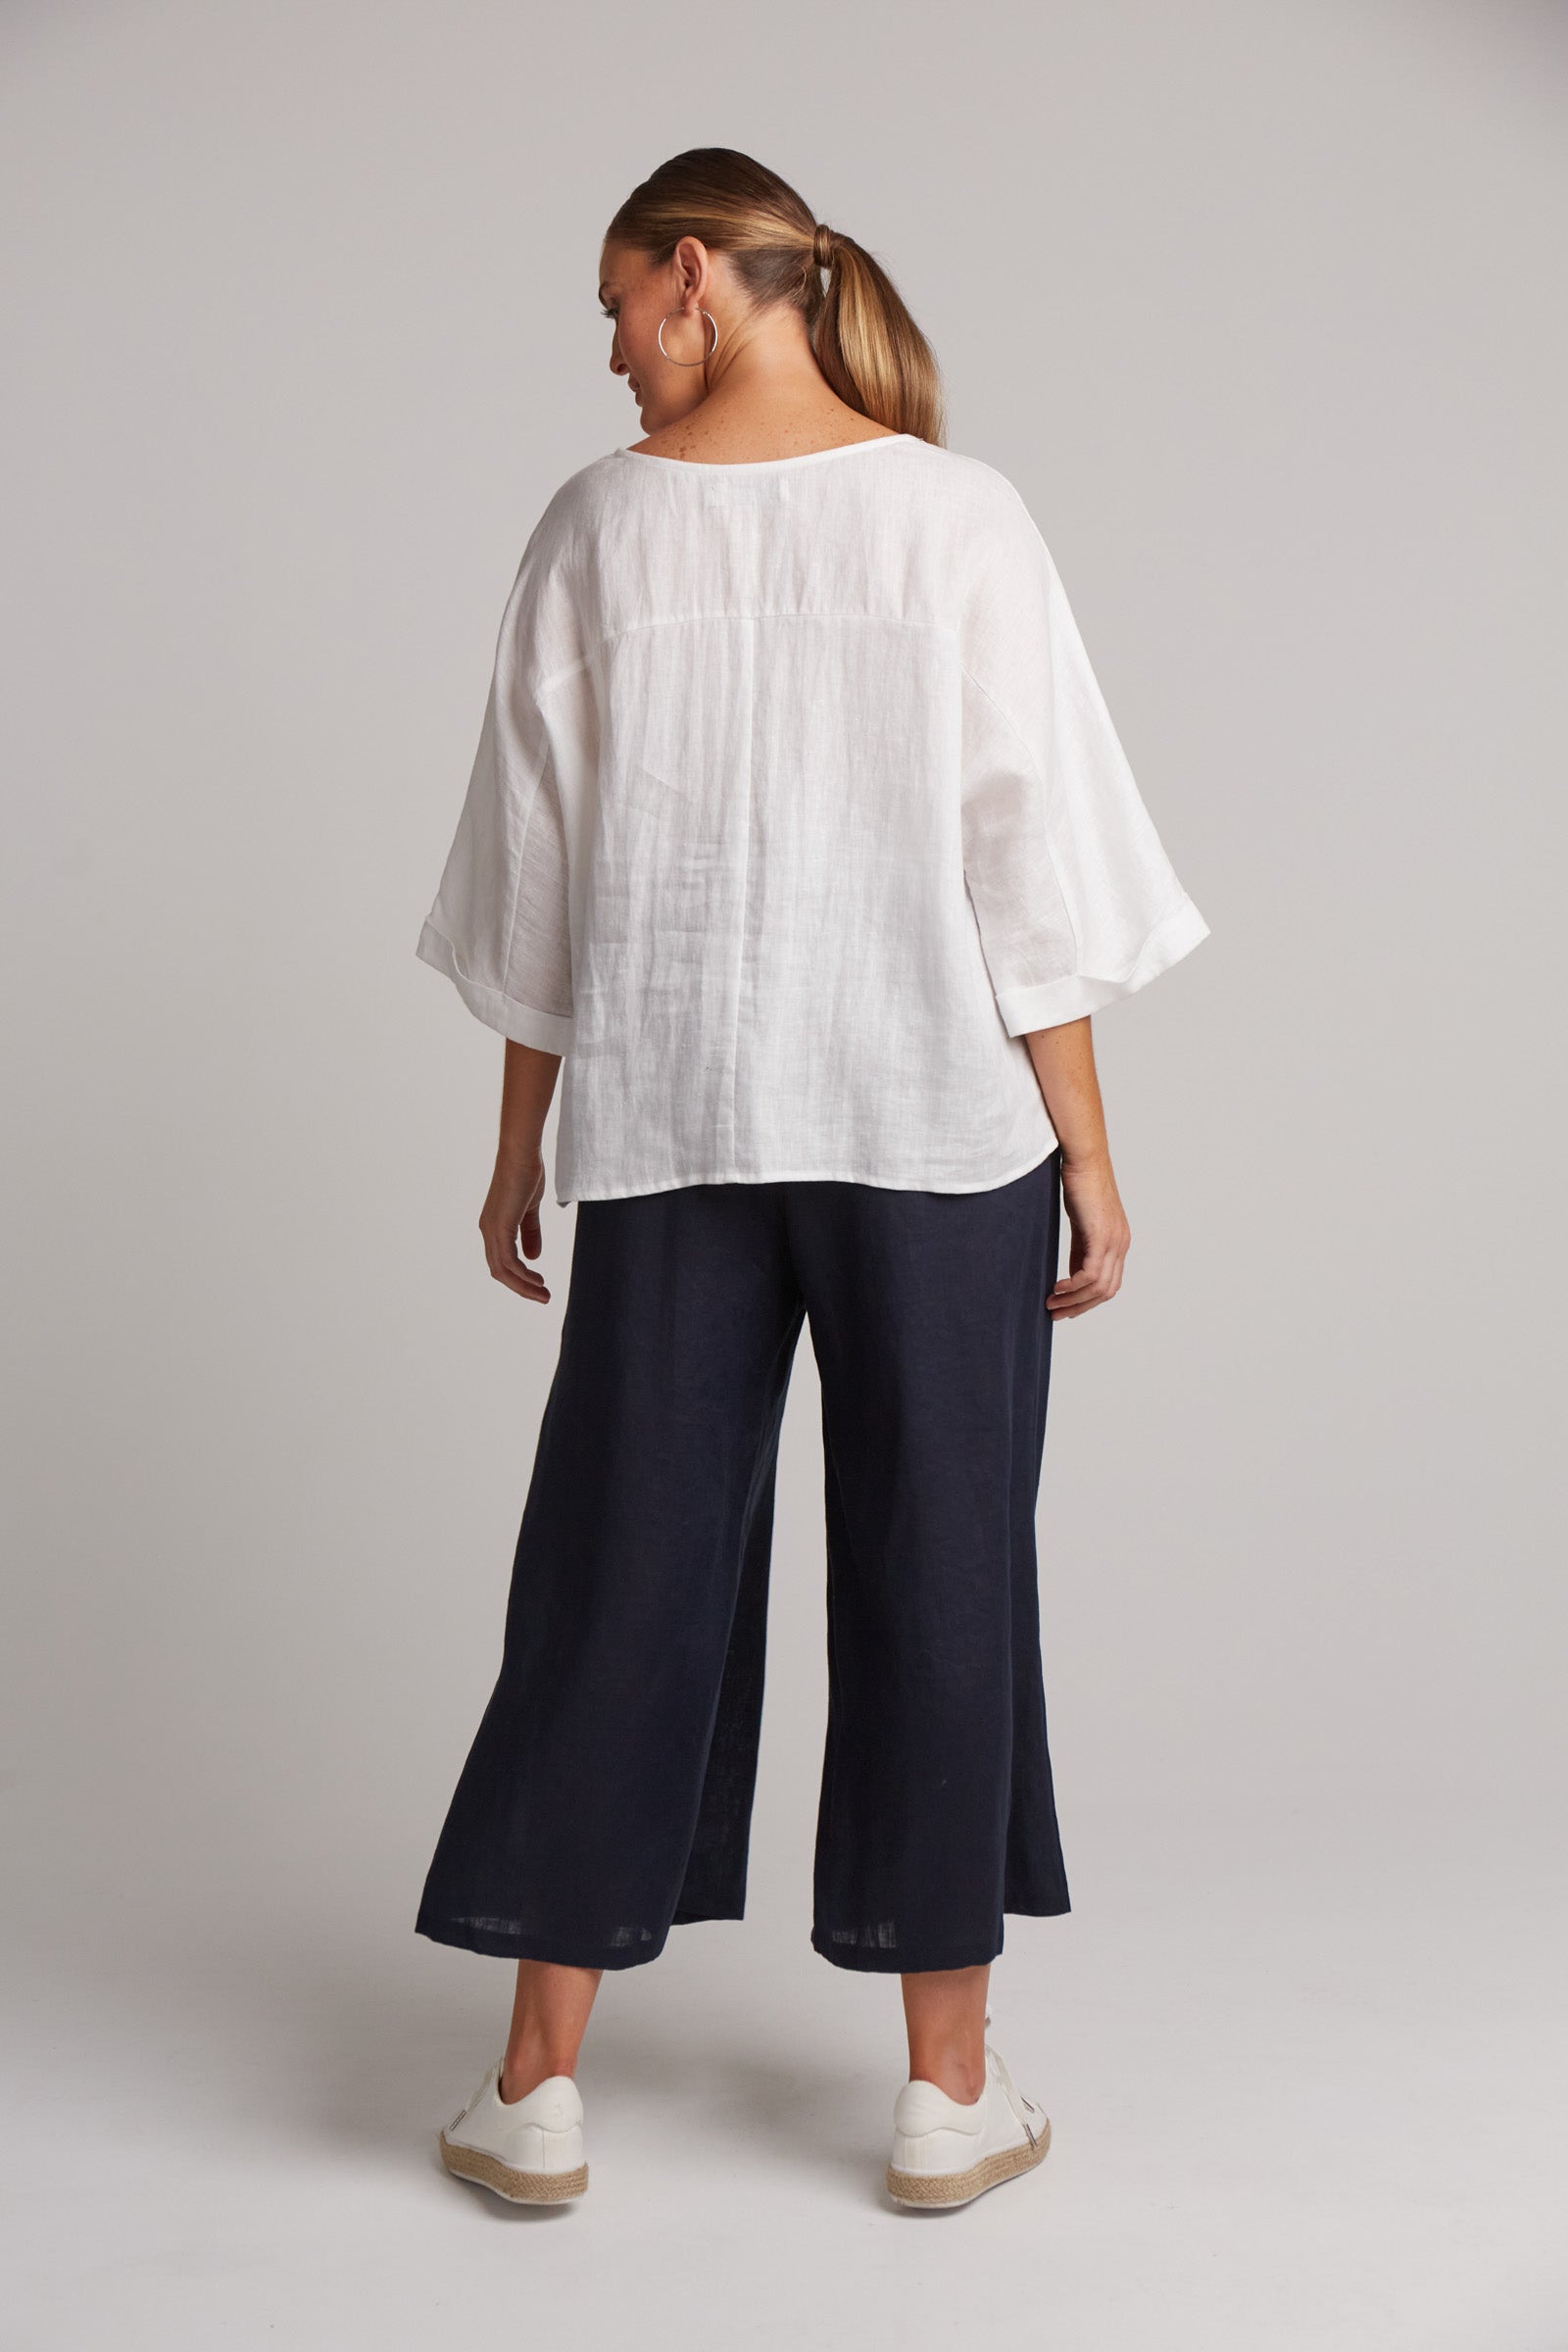 Studio Relaxed Top - Salt - eb&ive Clothing - Top 3/4 Sleeve Linen